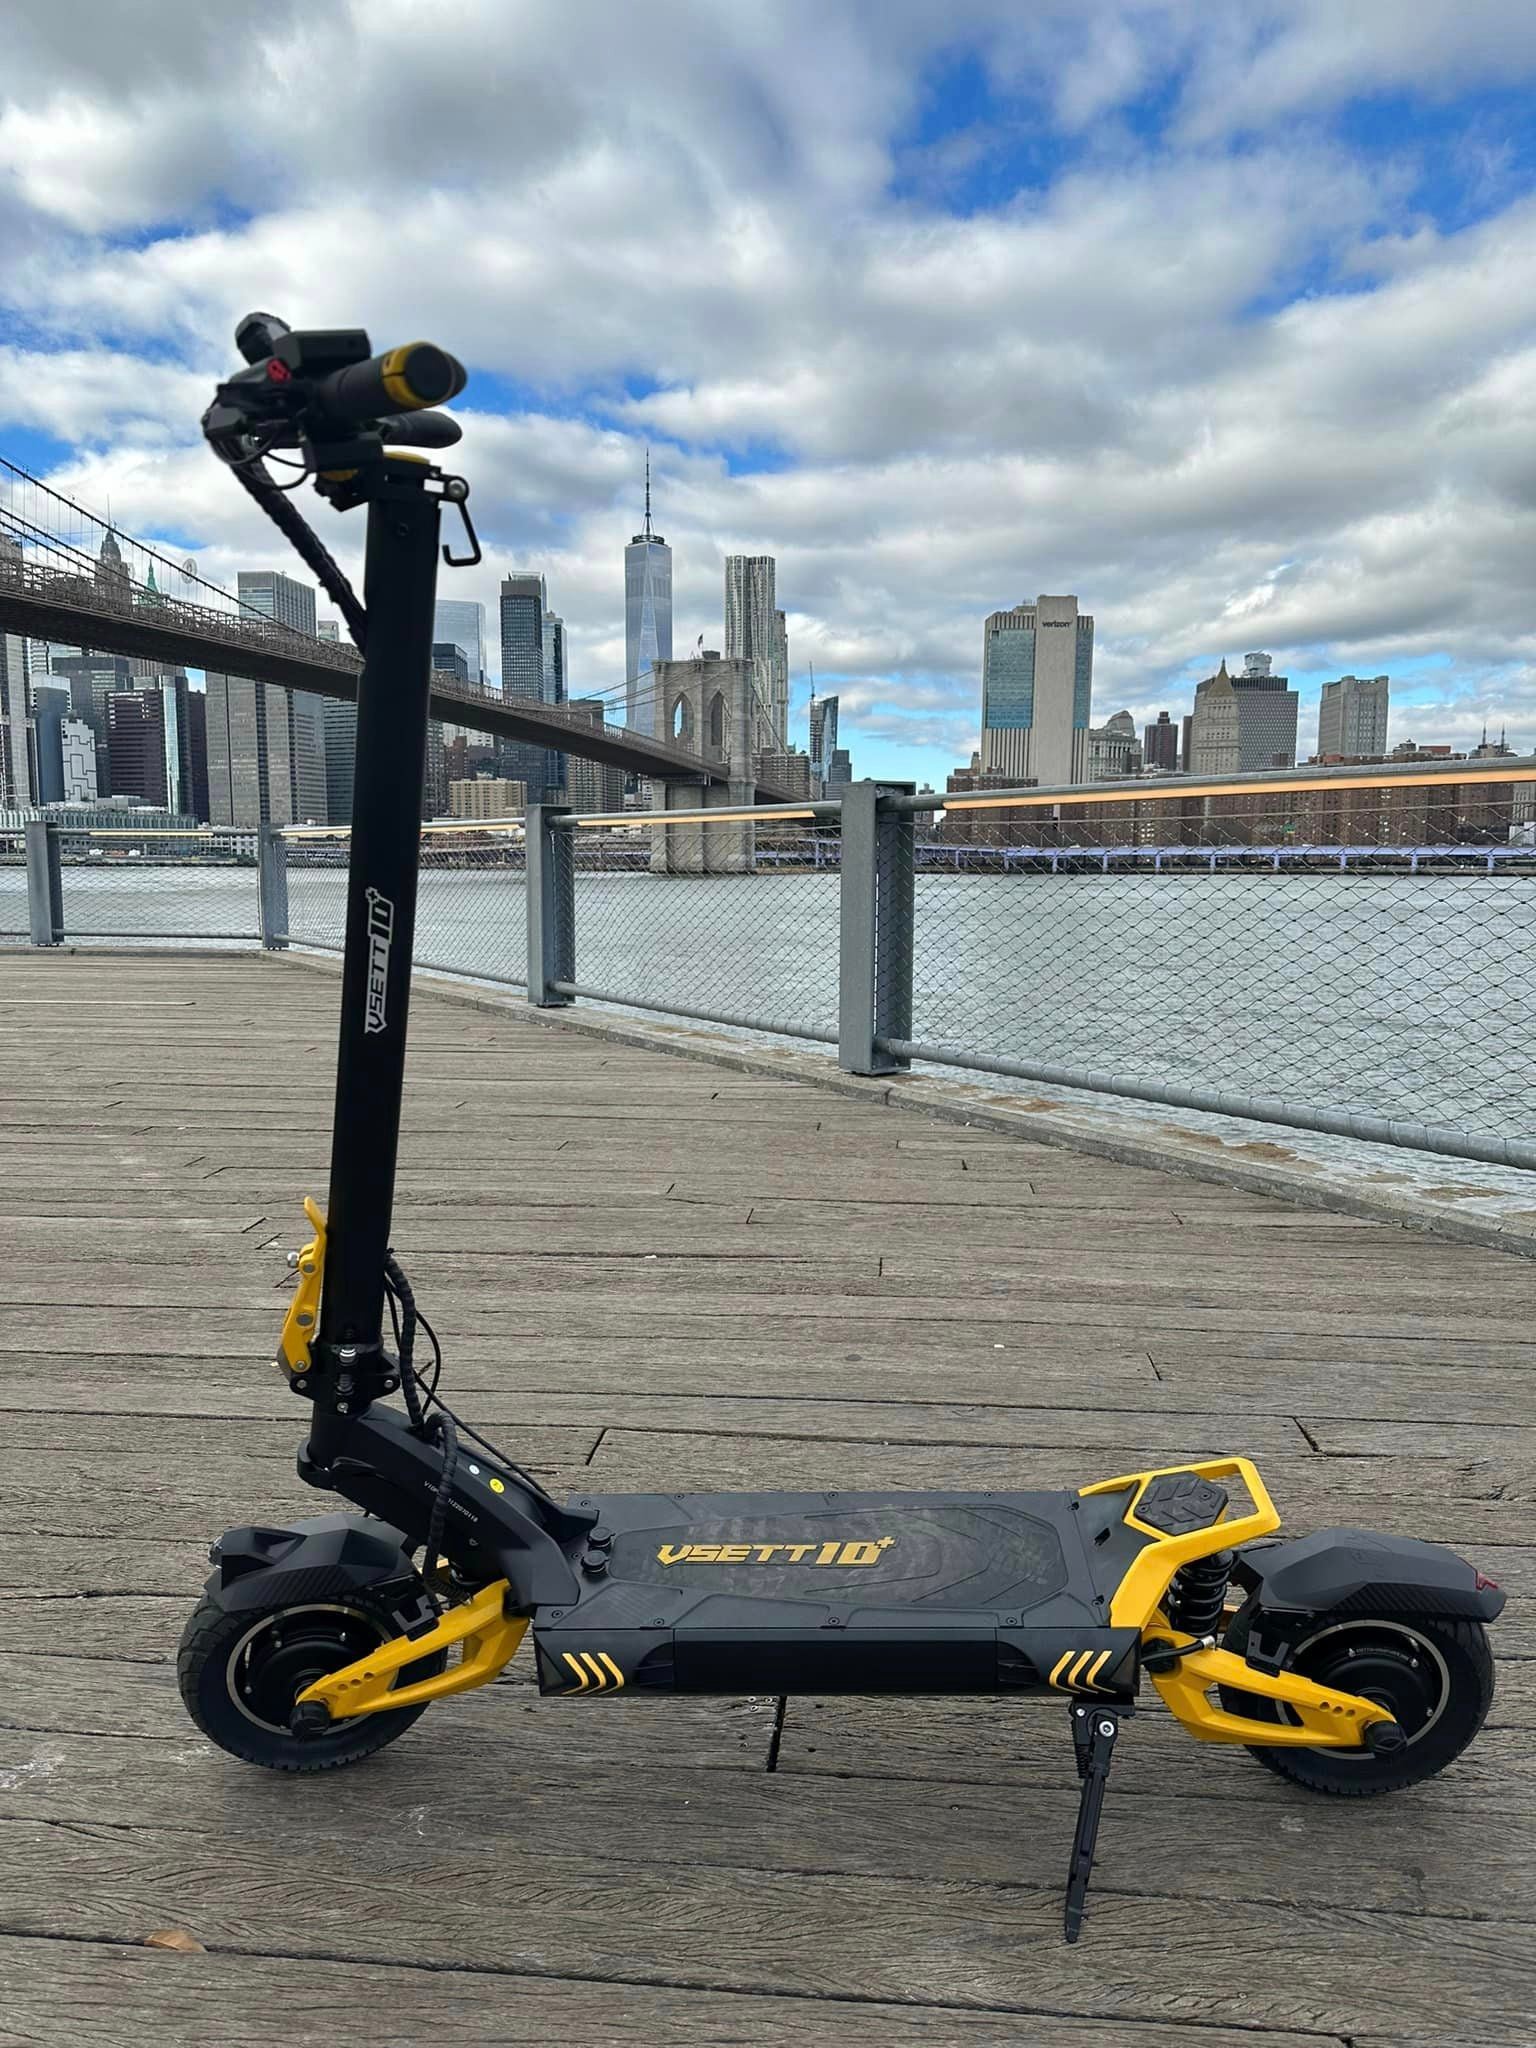 VSETT 10 Plus The Next Generation Of Electric Scooter | EScooter - ZERO ...